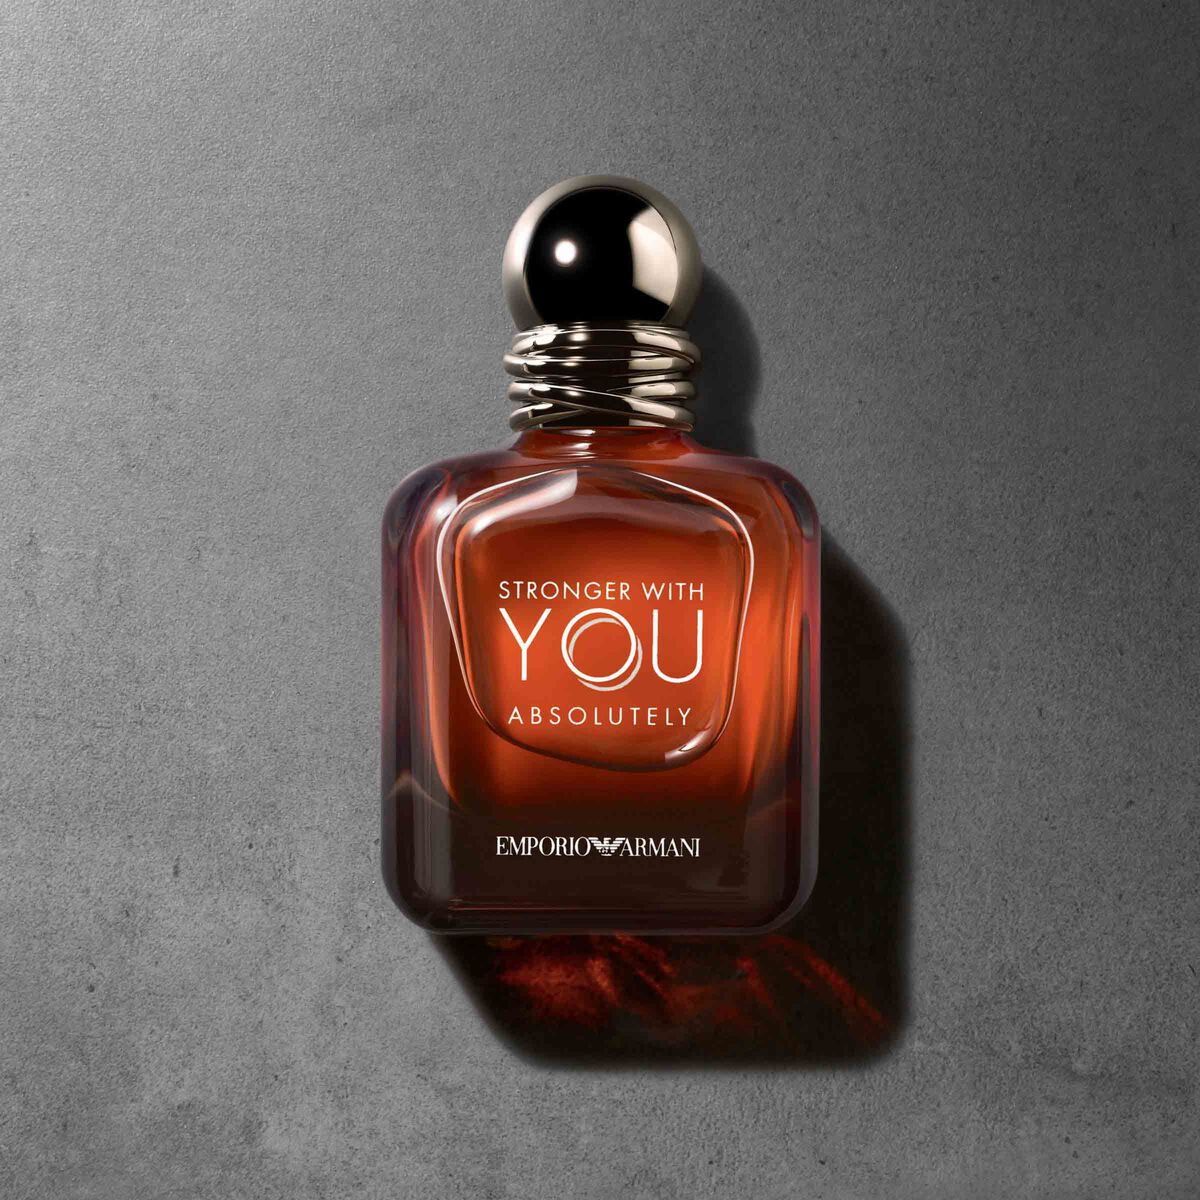 Emporio Armani Stronger With You Absolutely | Armani Beauty